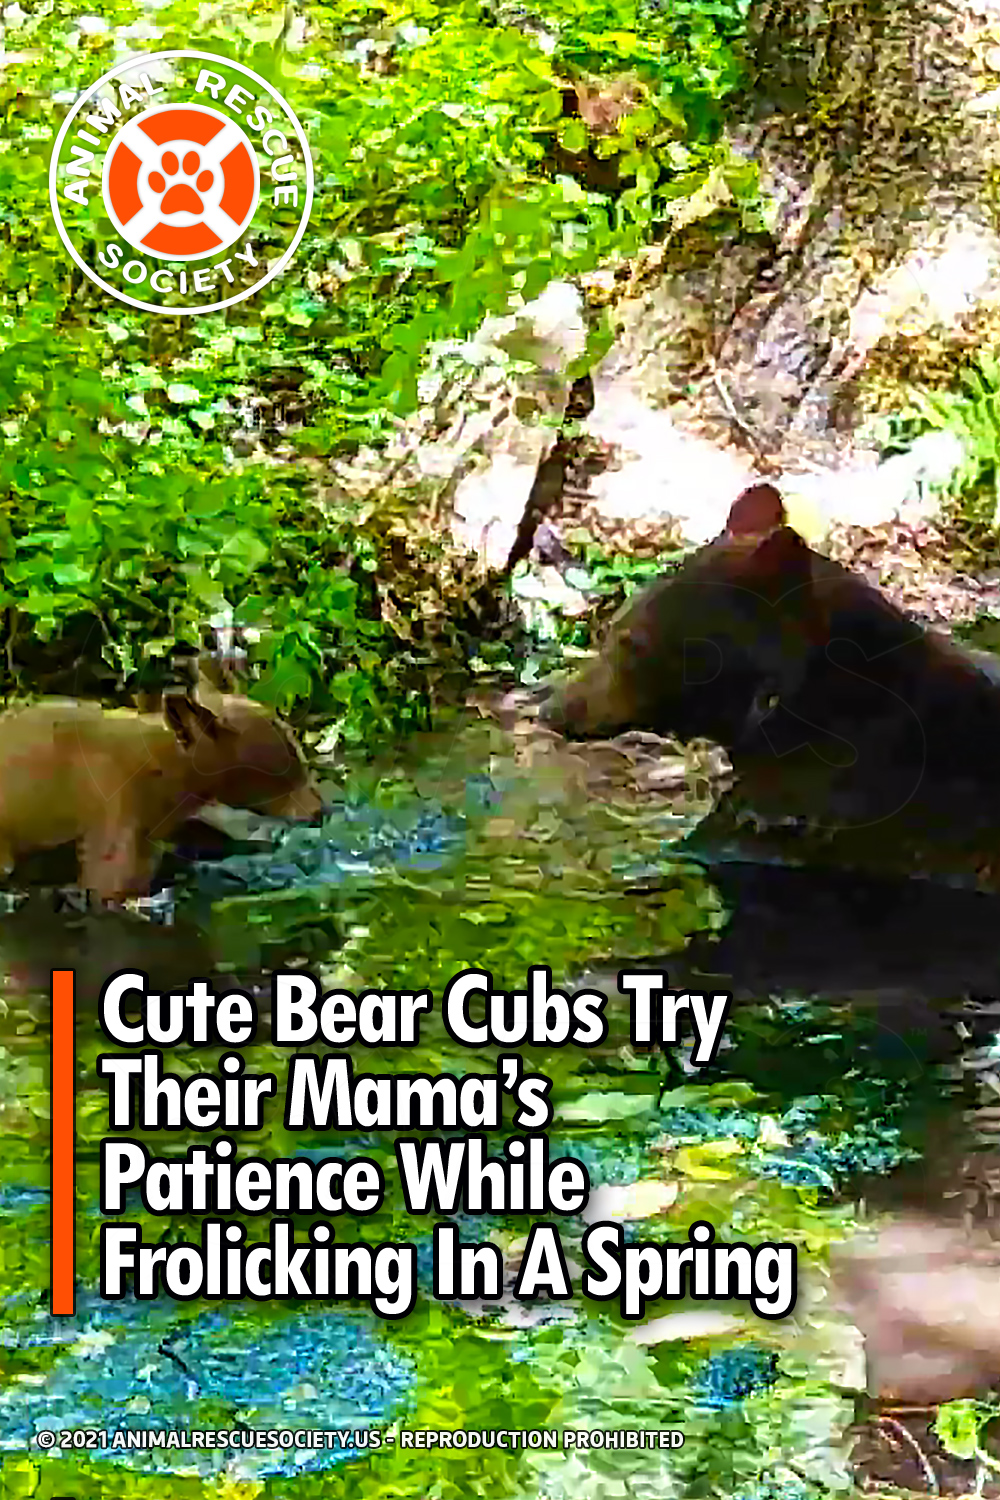 Cute Bear Cubs Try Their Mama’s Patience While Frolicking In A Spring